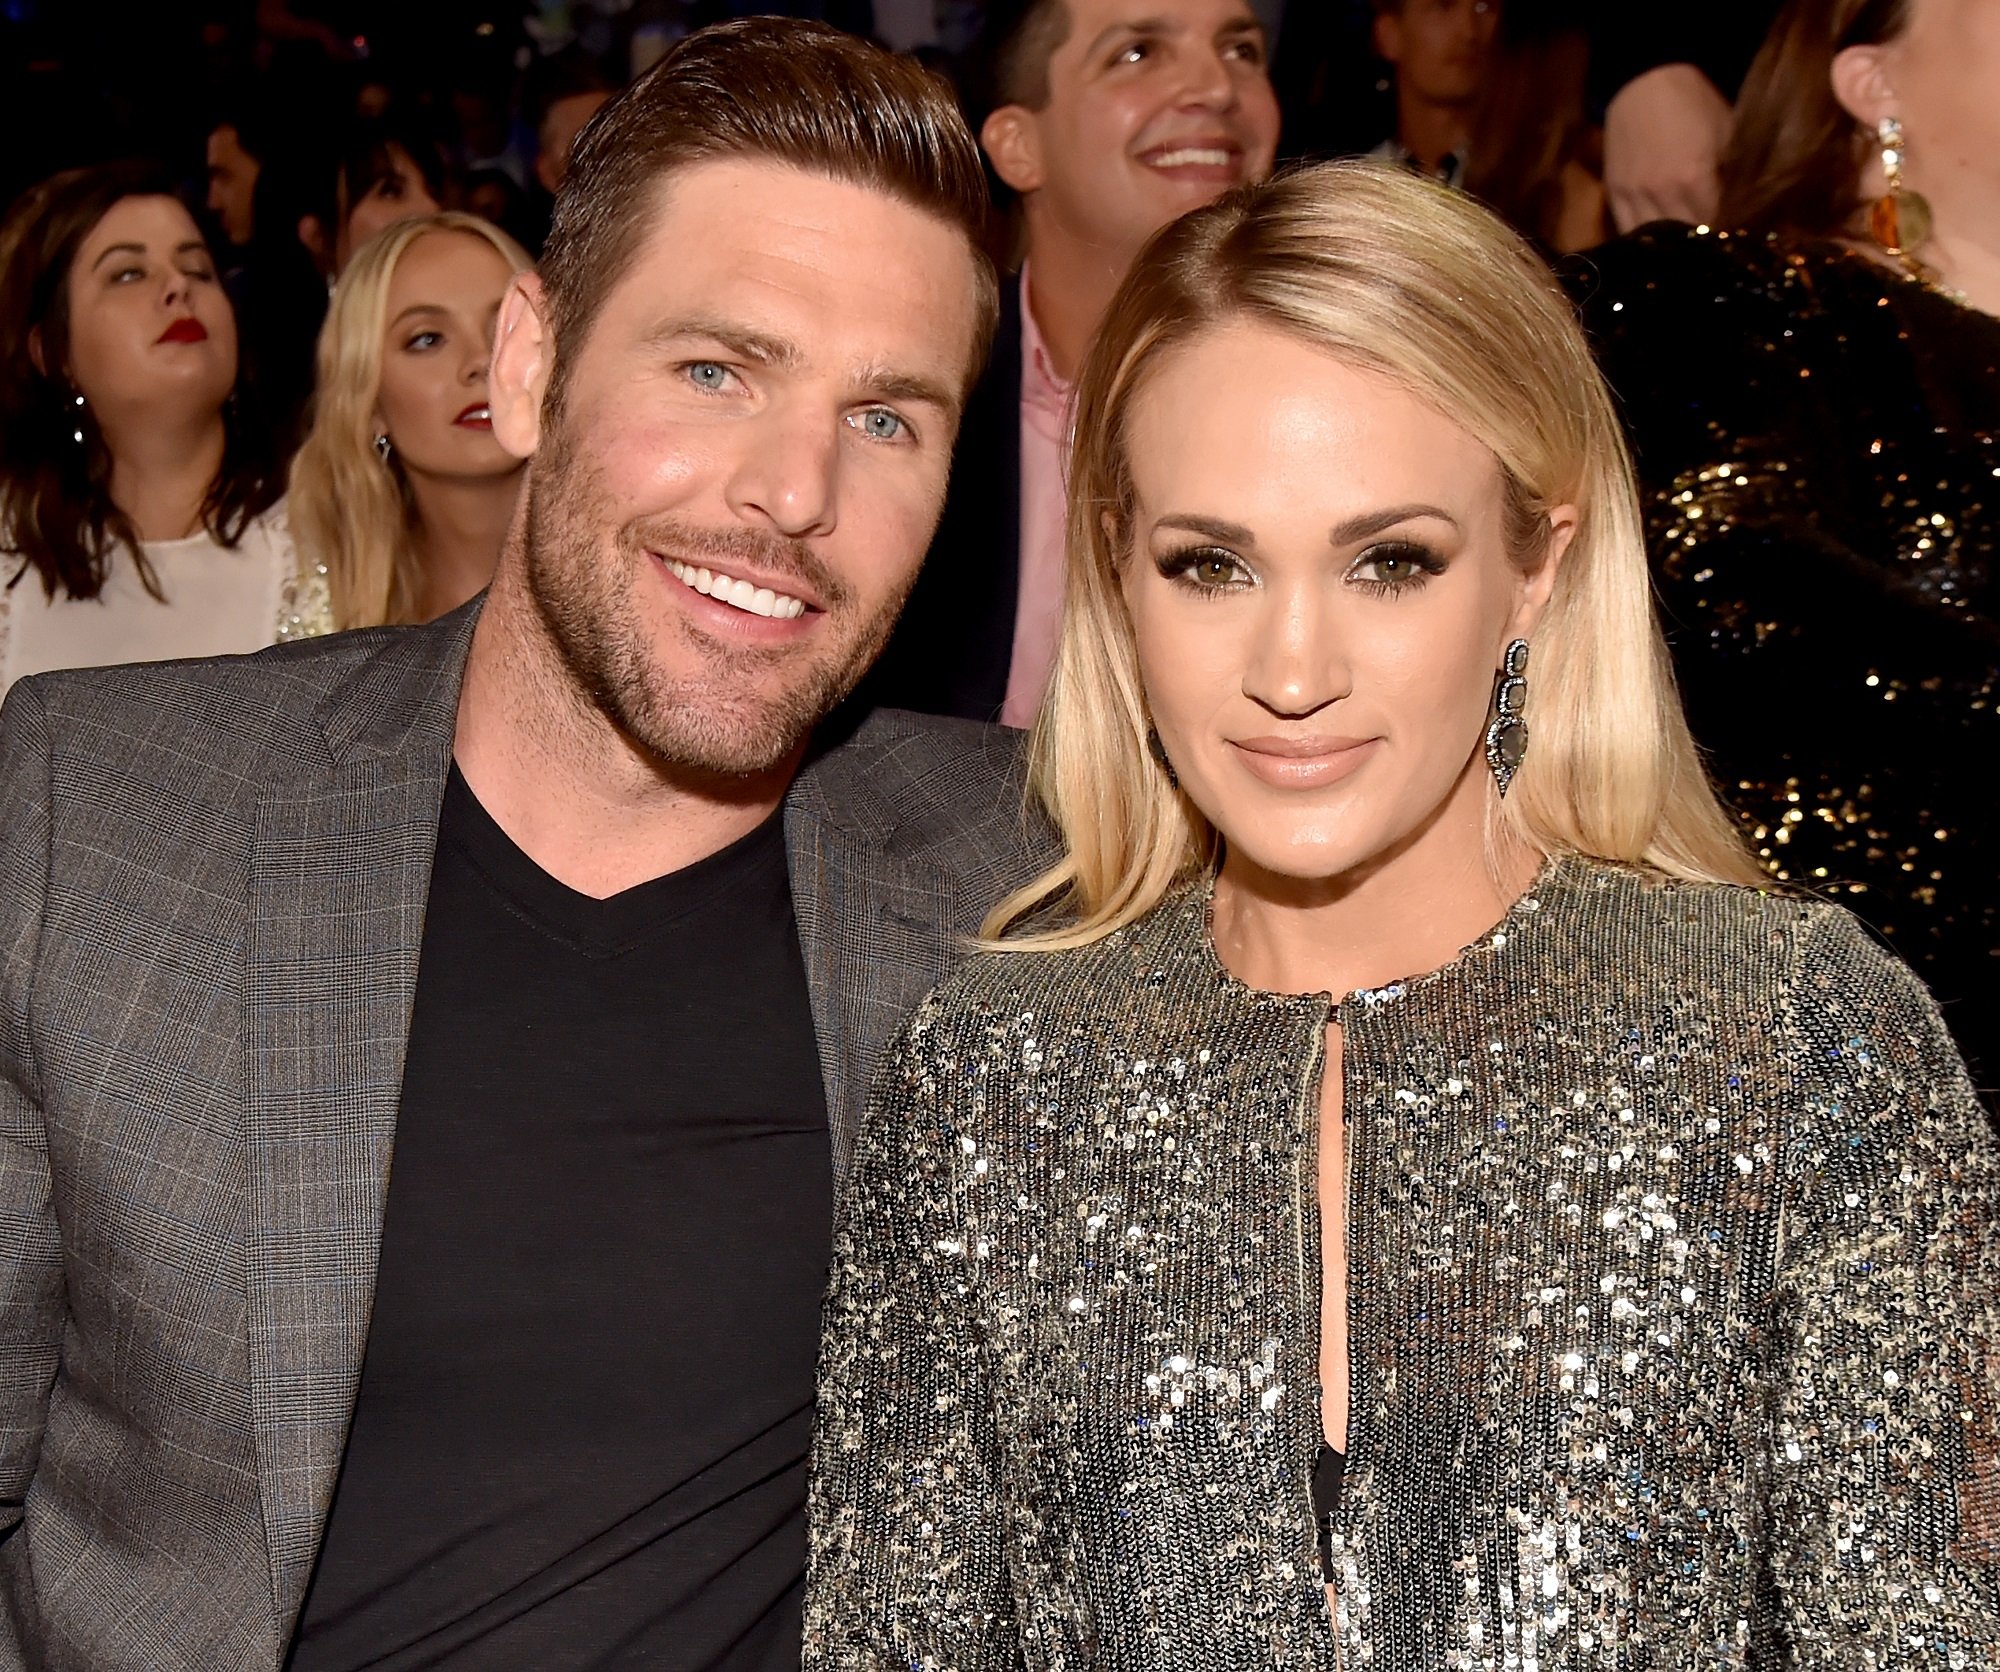 Mike Fisher and Carrie Underwood smile at the camera